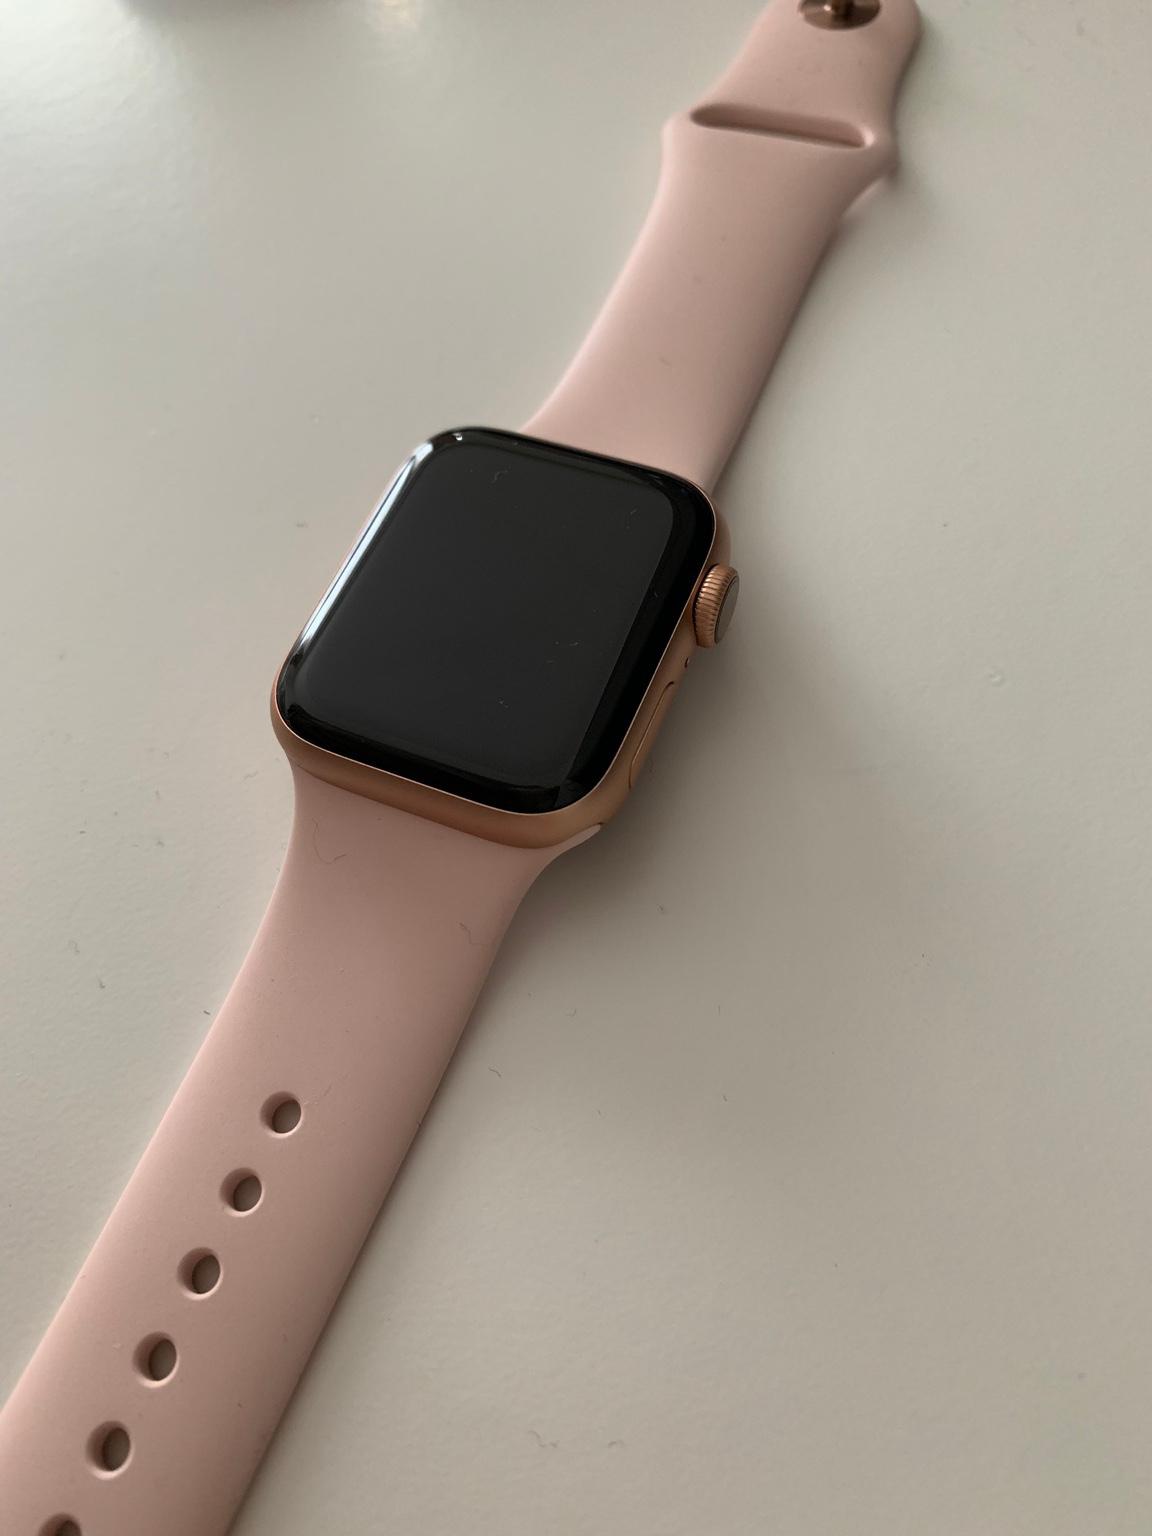 APPLE WATCH S4 GPS 40mm - Gold Aluminium in SE5 London for £300.00